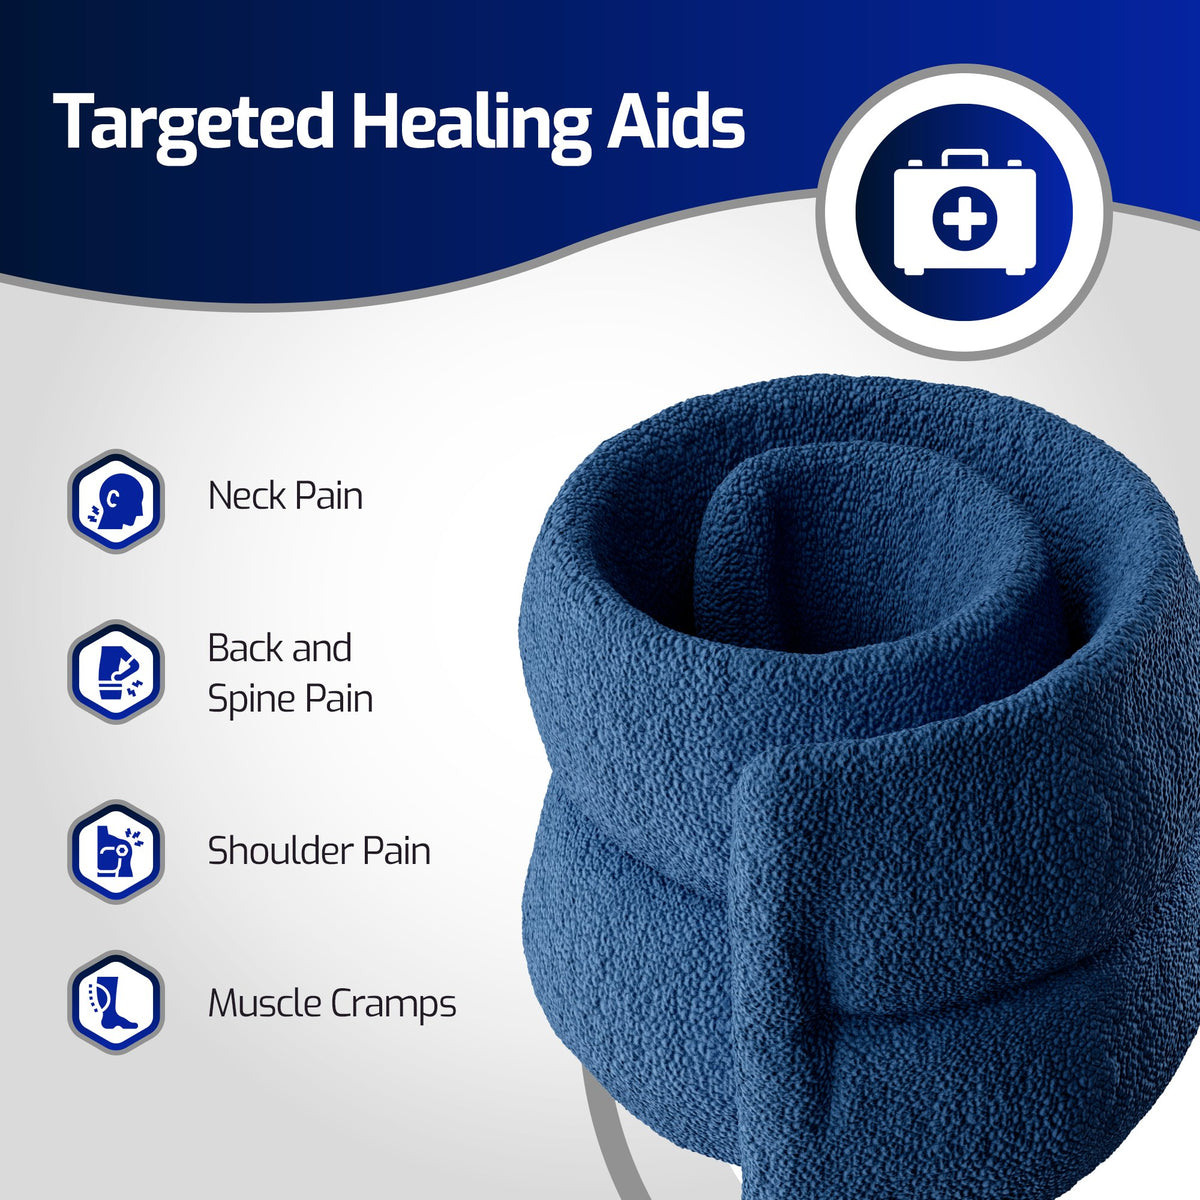 Hot or Cold Therapy Neck Wrap (17.7” x 5.5”) - Tourmaline Filling Neck Heating Pad - Blue Polyester Microwave Heating Pad for Neck and Shoulders - Spot Wash Heat and Cold Pad